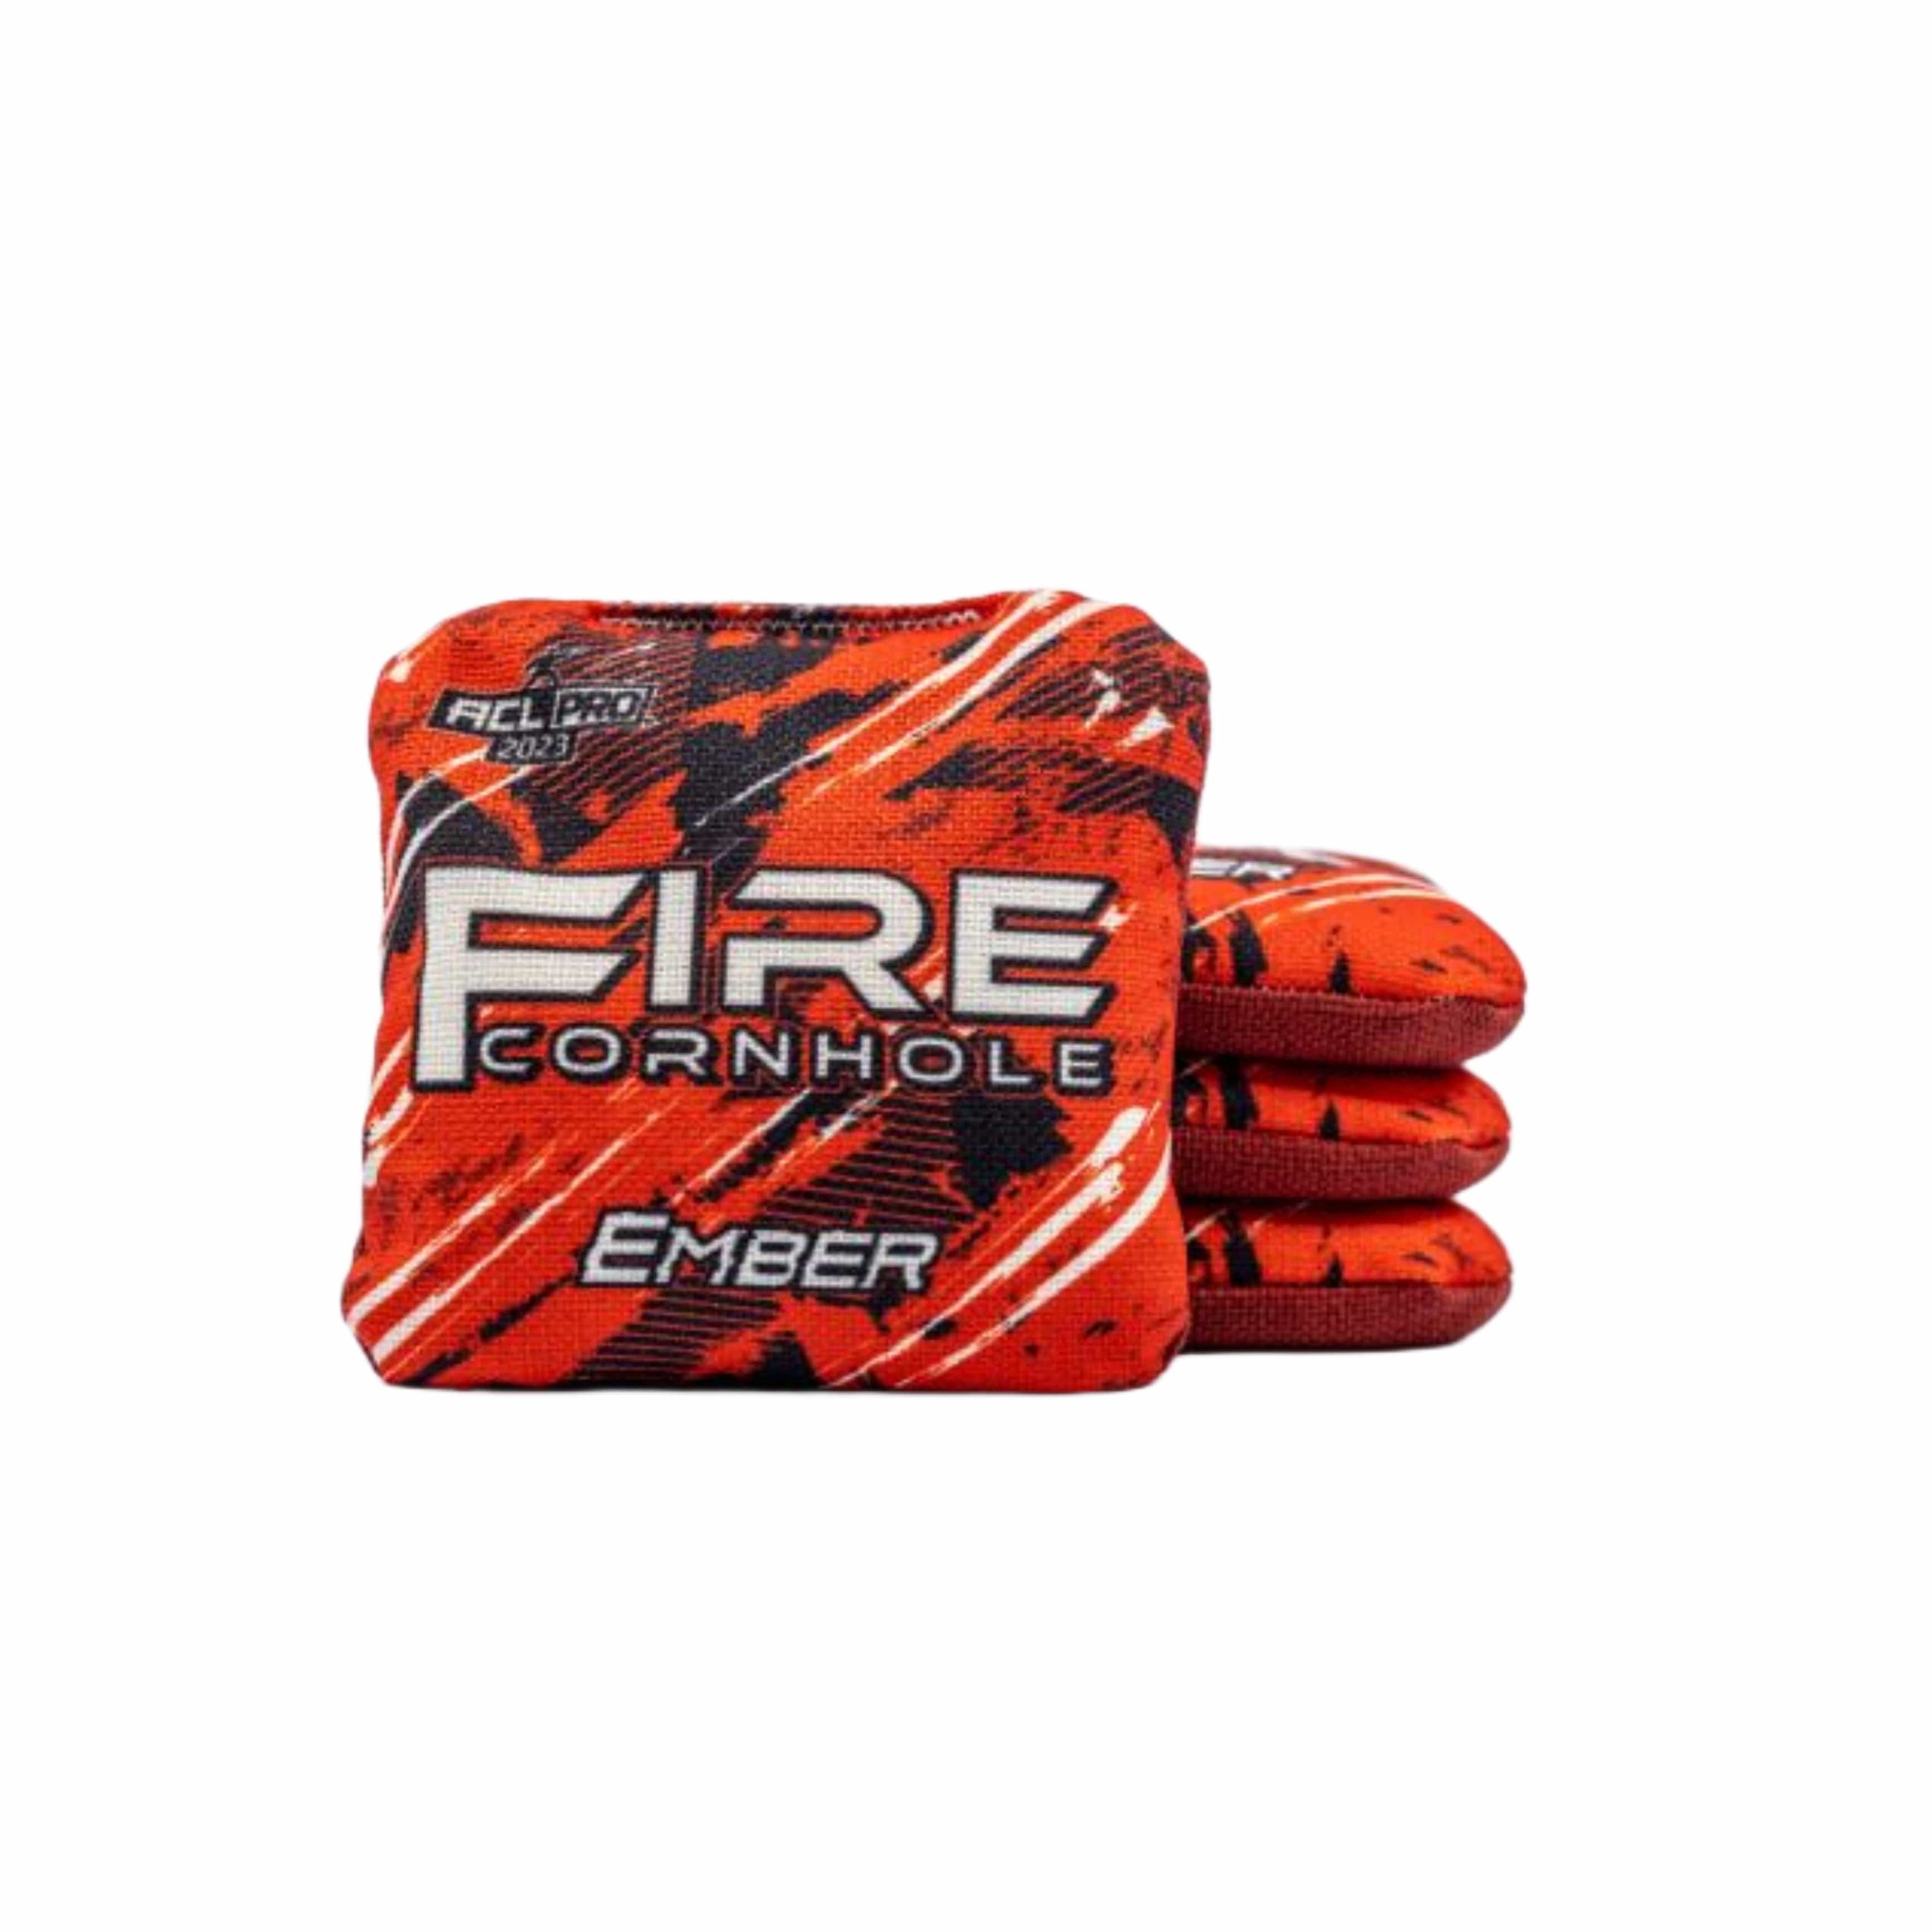 Fire Cornhole Fire Ember ACL bags in red